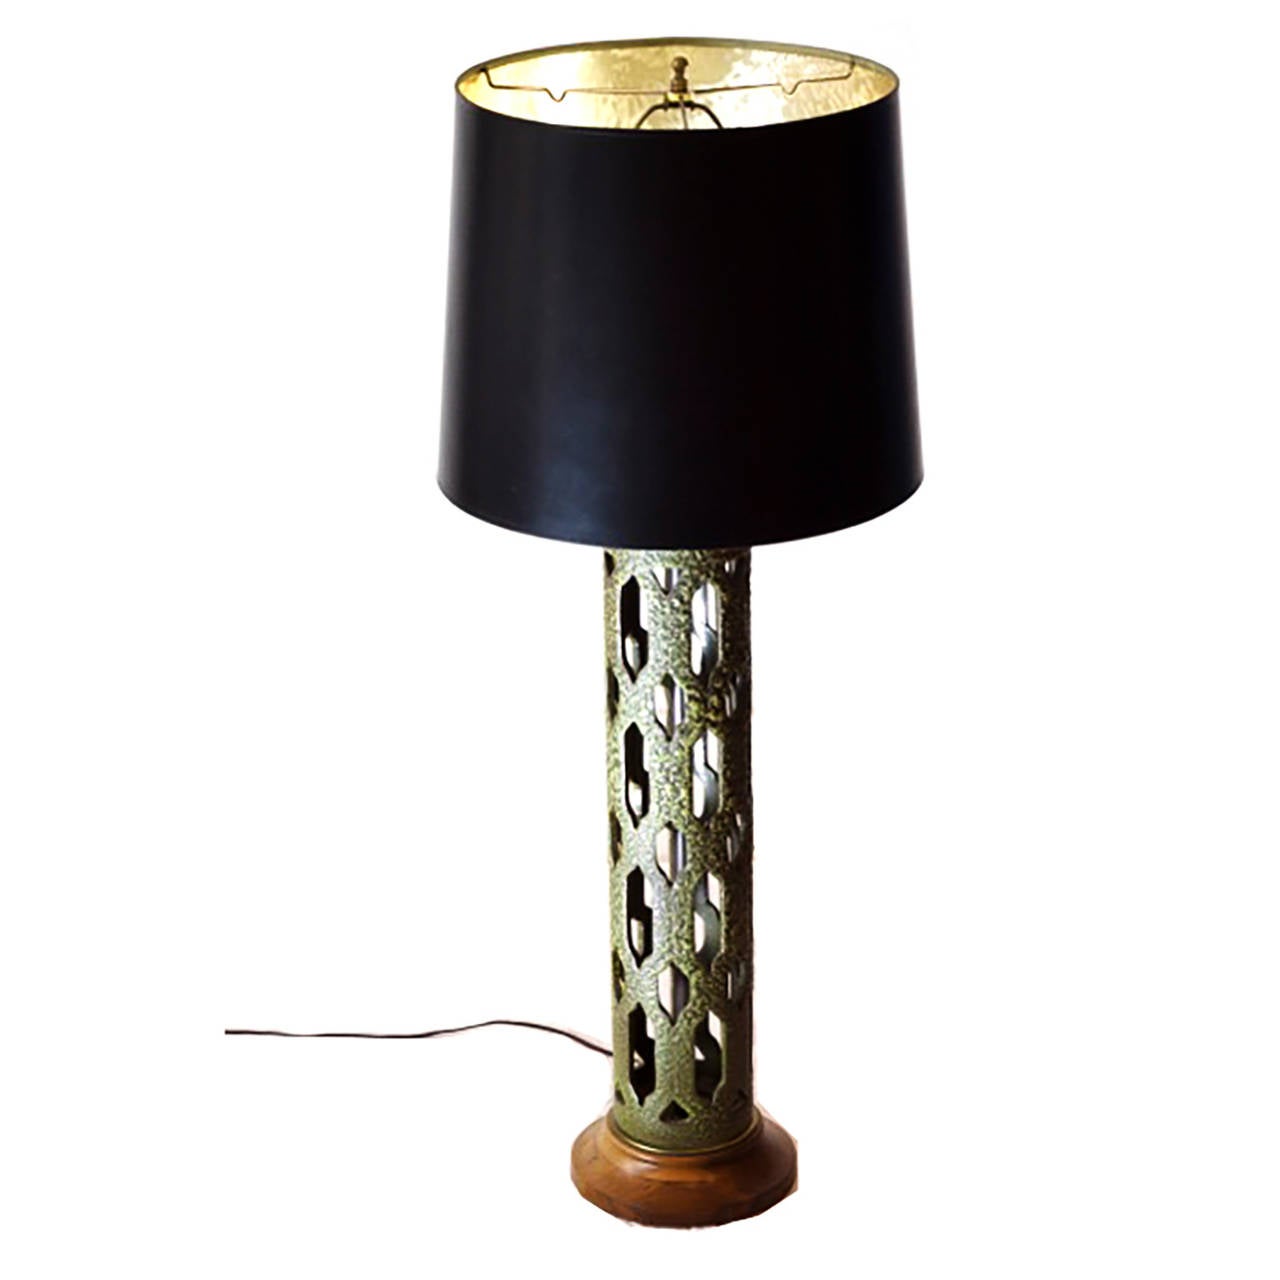 Midcentury art pottery lamp with wooden base. New black and gold lined shade. Wiring is in good condition.